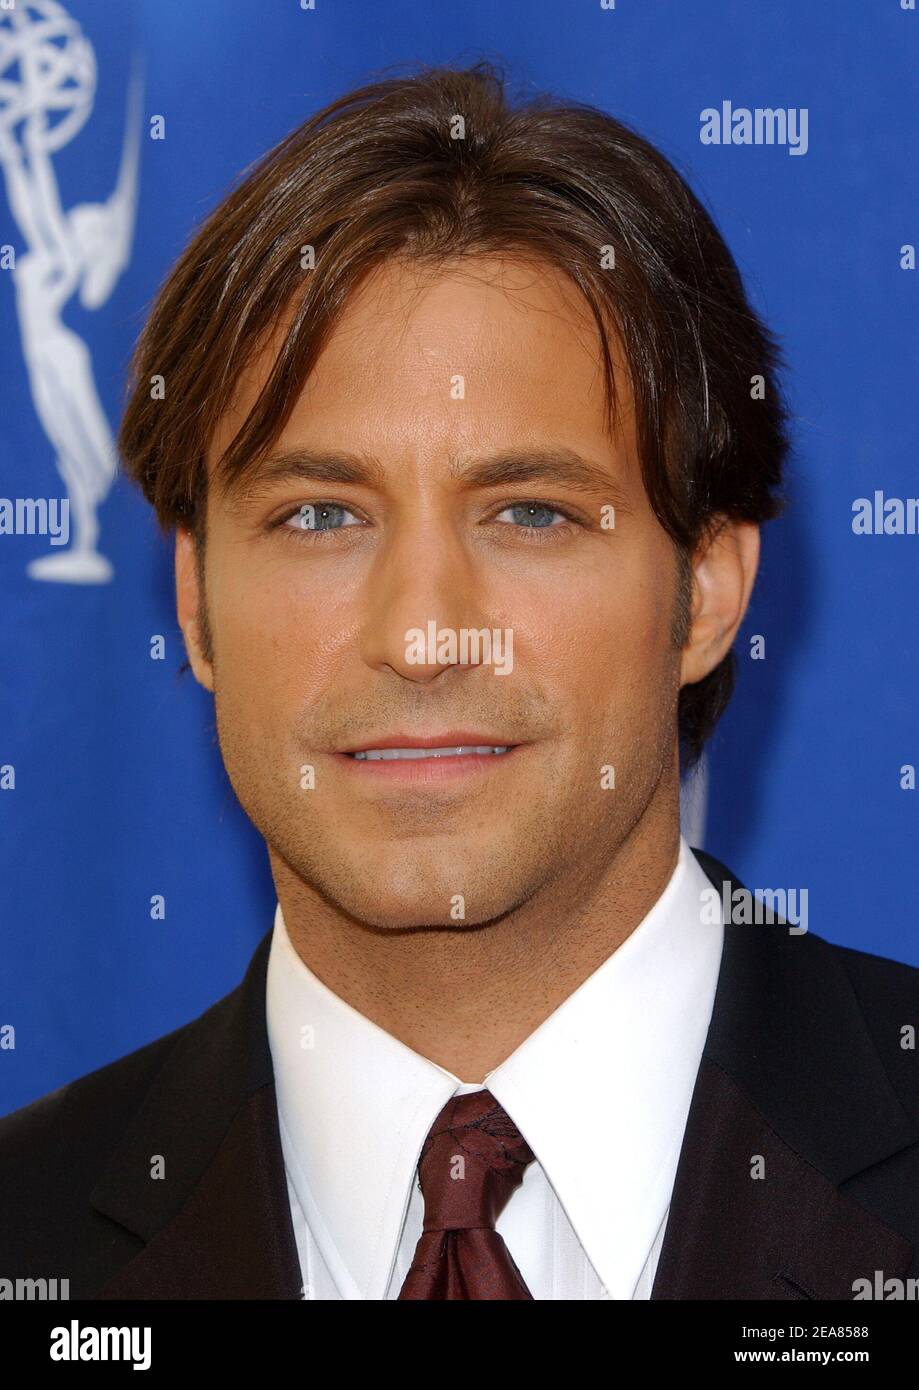 Ty Treadway arrives at the 31st Annual Daytime Emmy Awards Creative Arts presentation, held at the Hollywood & Highland Grand Ballroom, in Los Angeles, on Saturday, May 15, 2004. (Pictured : Ty Treadway). Photo by Nicolas Khayat/ABACA. Stock Photo